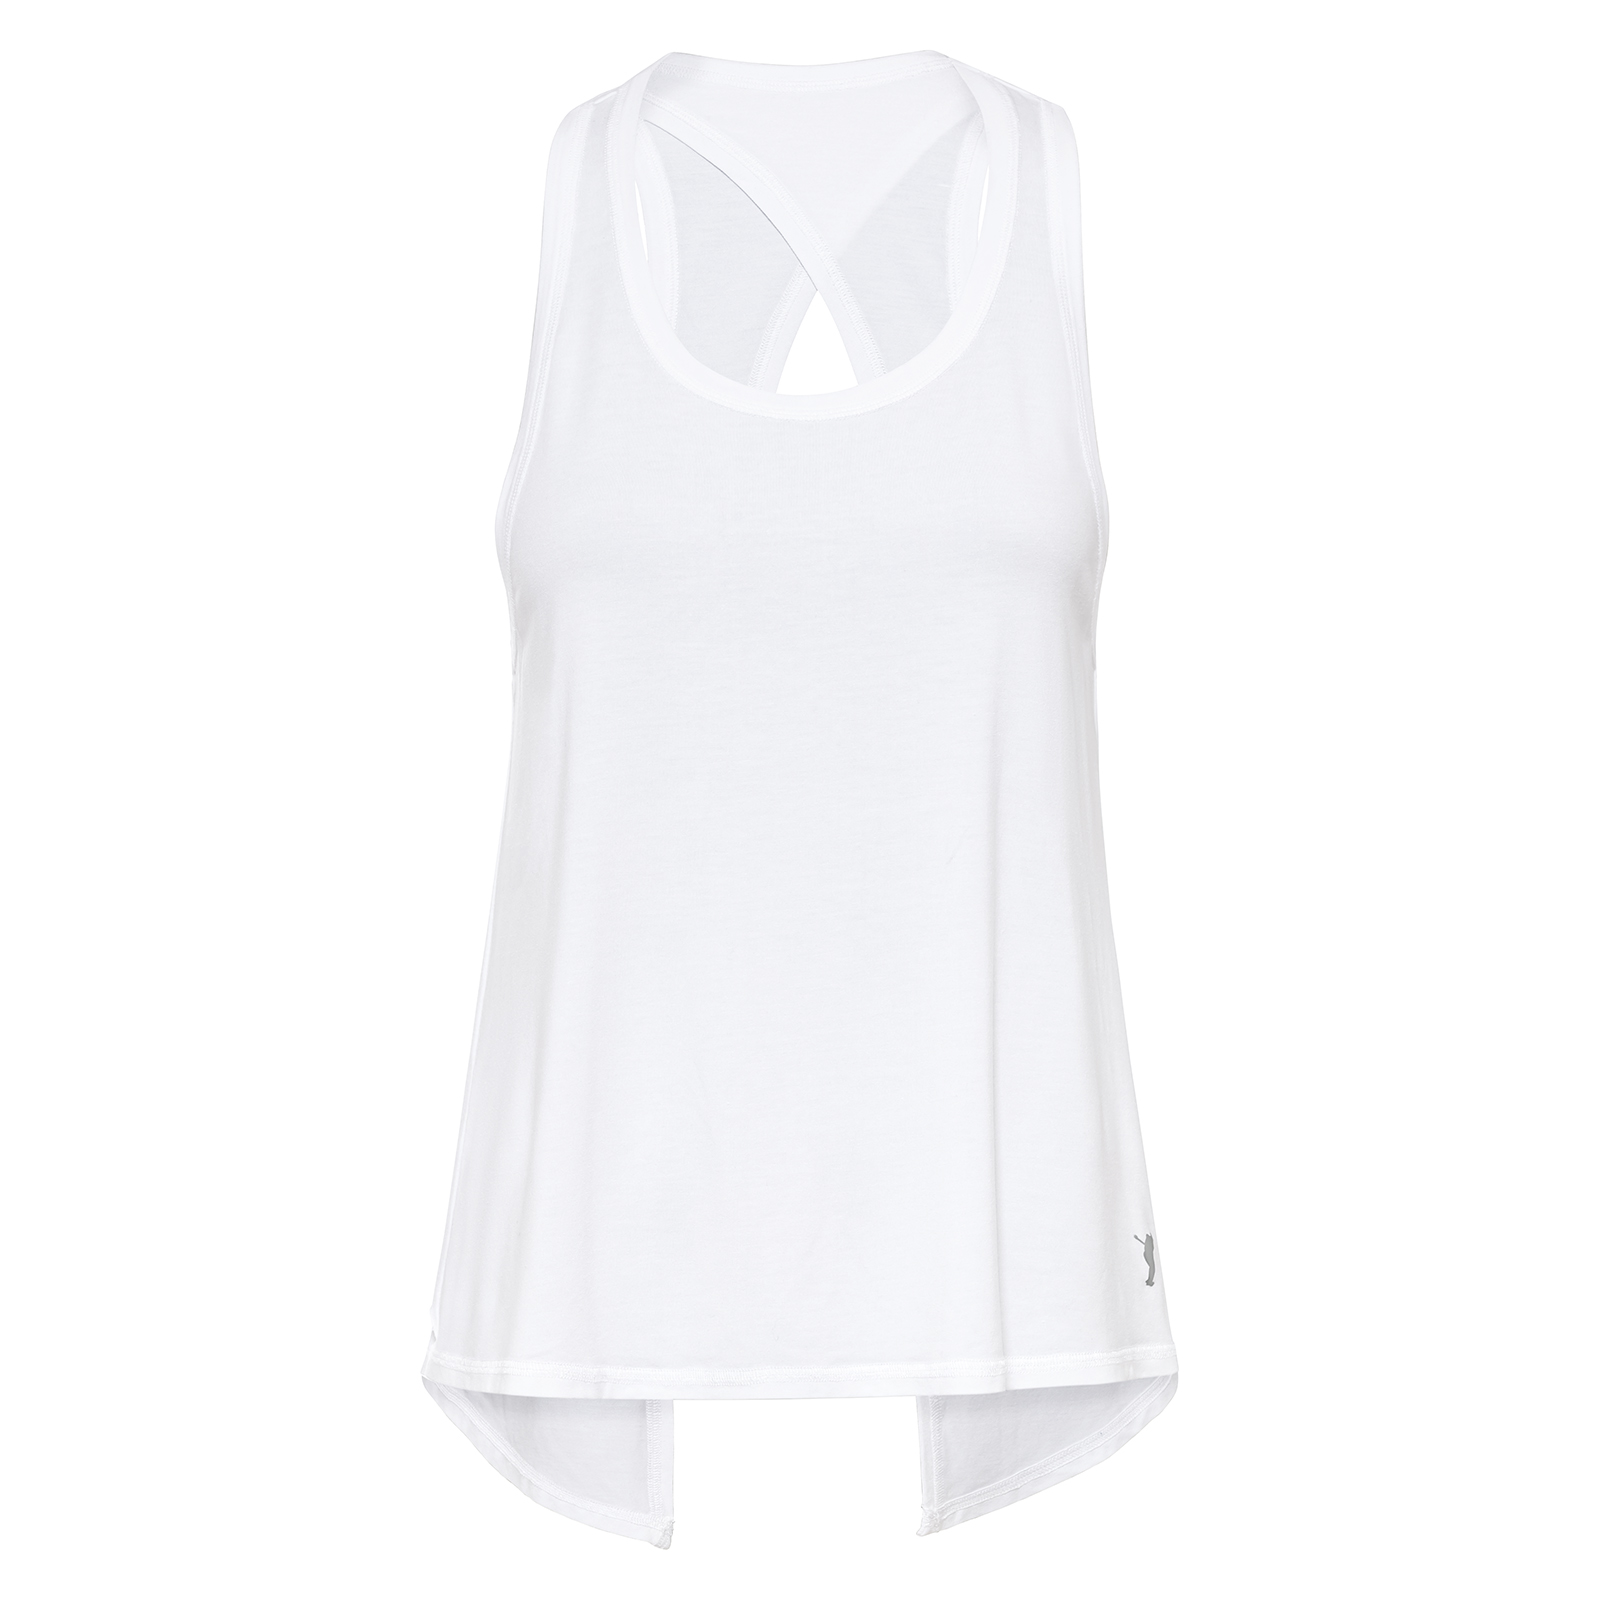 Sleeveless Ladies Vest Top with individual back design